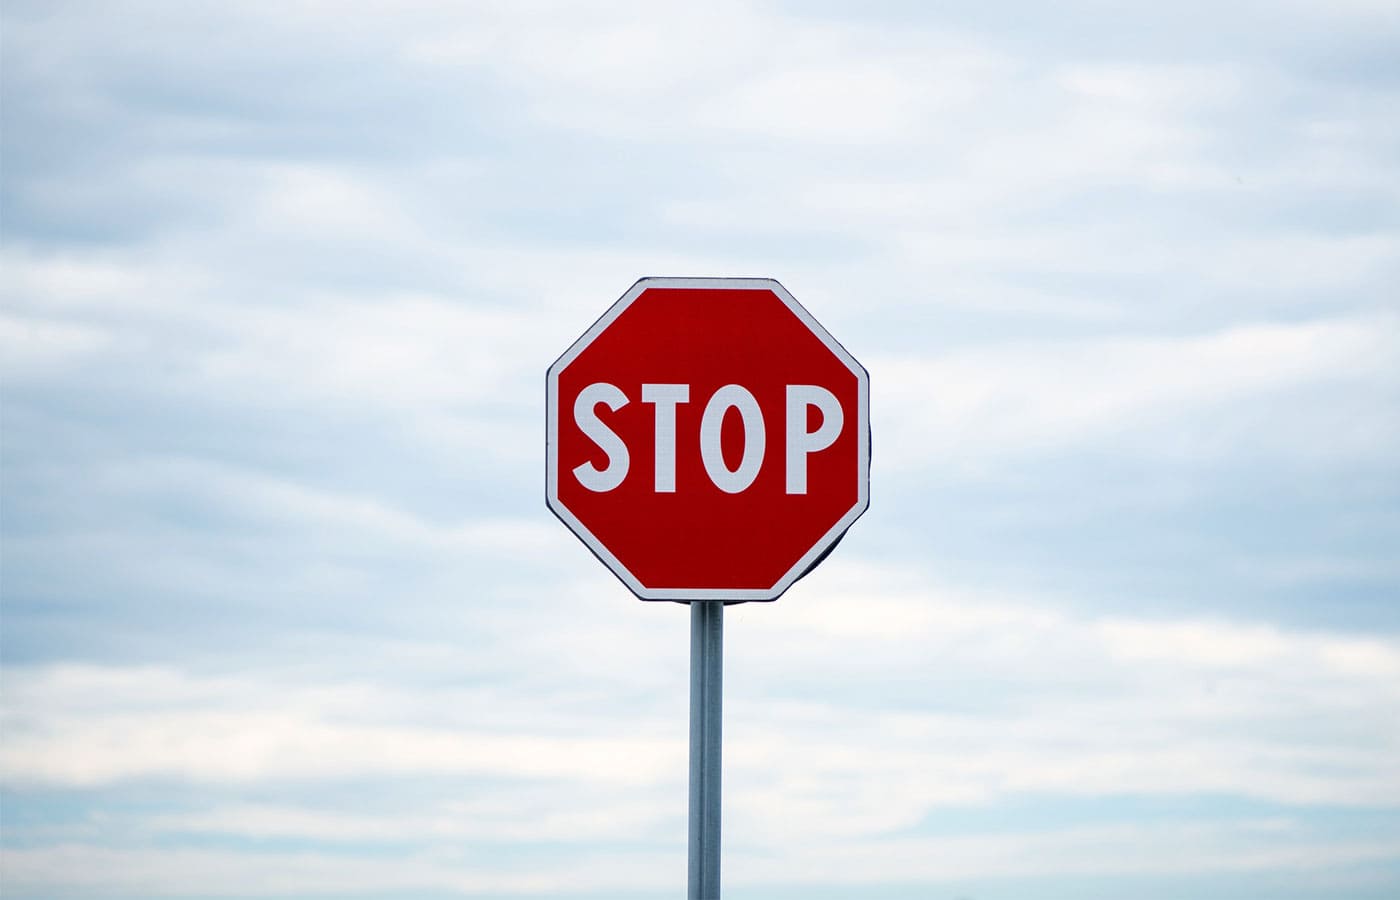 Stop sign on a cloudy day